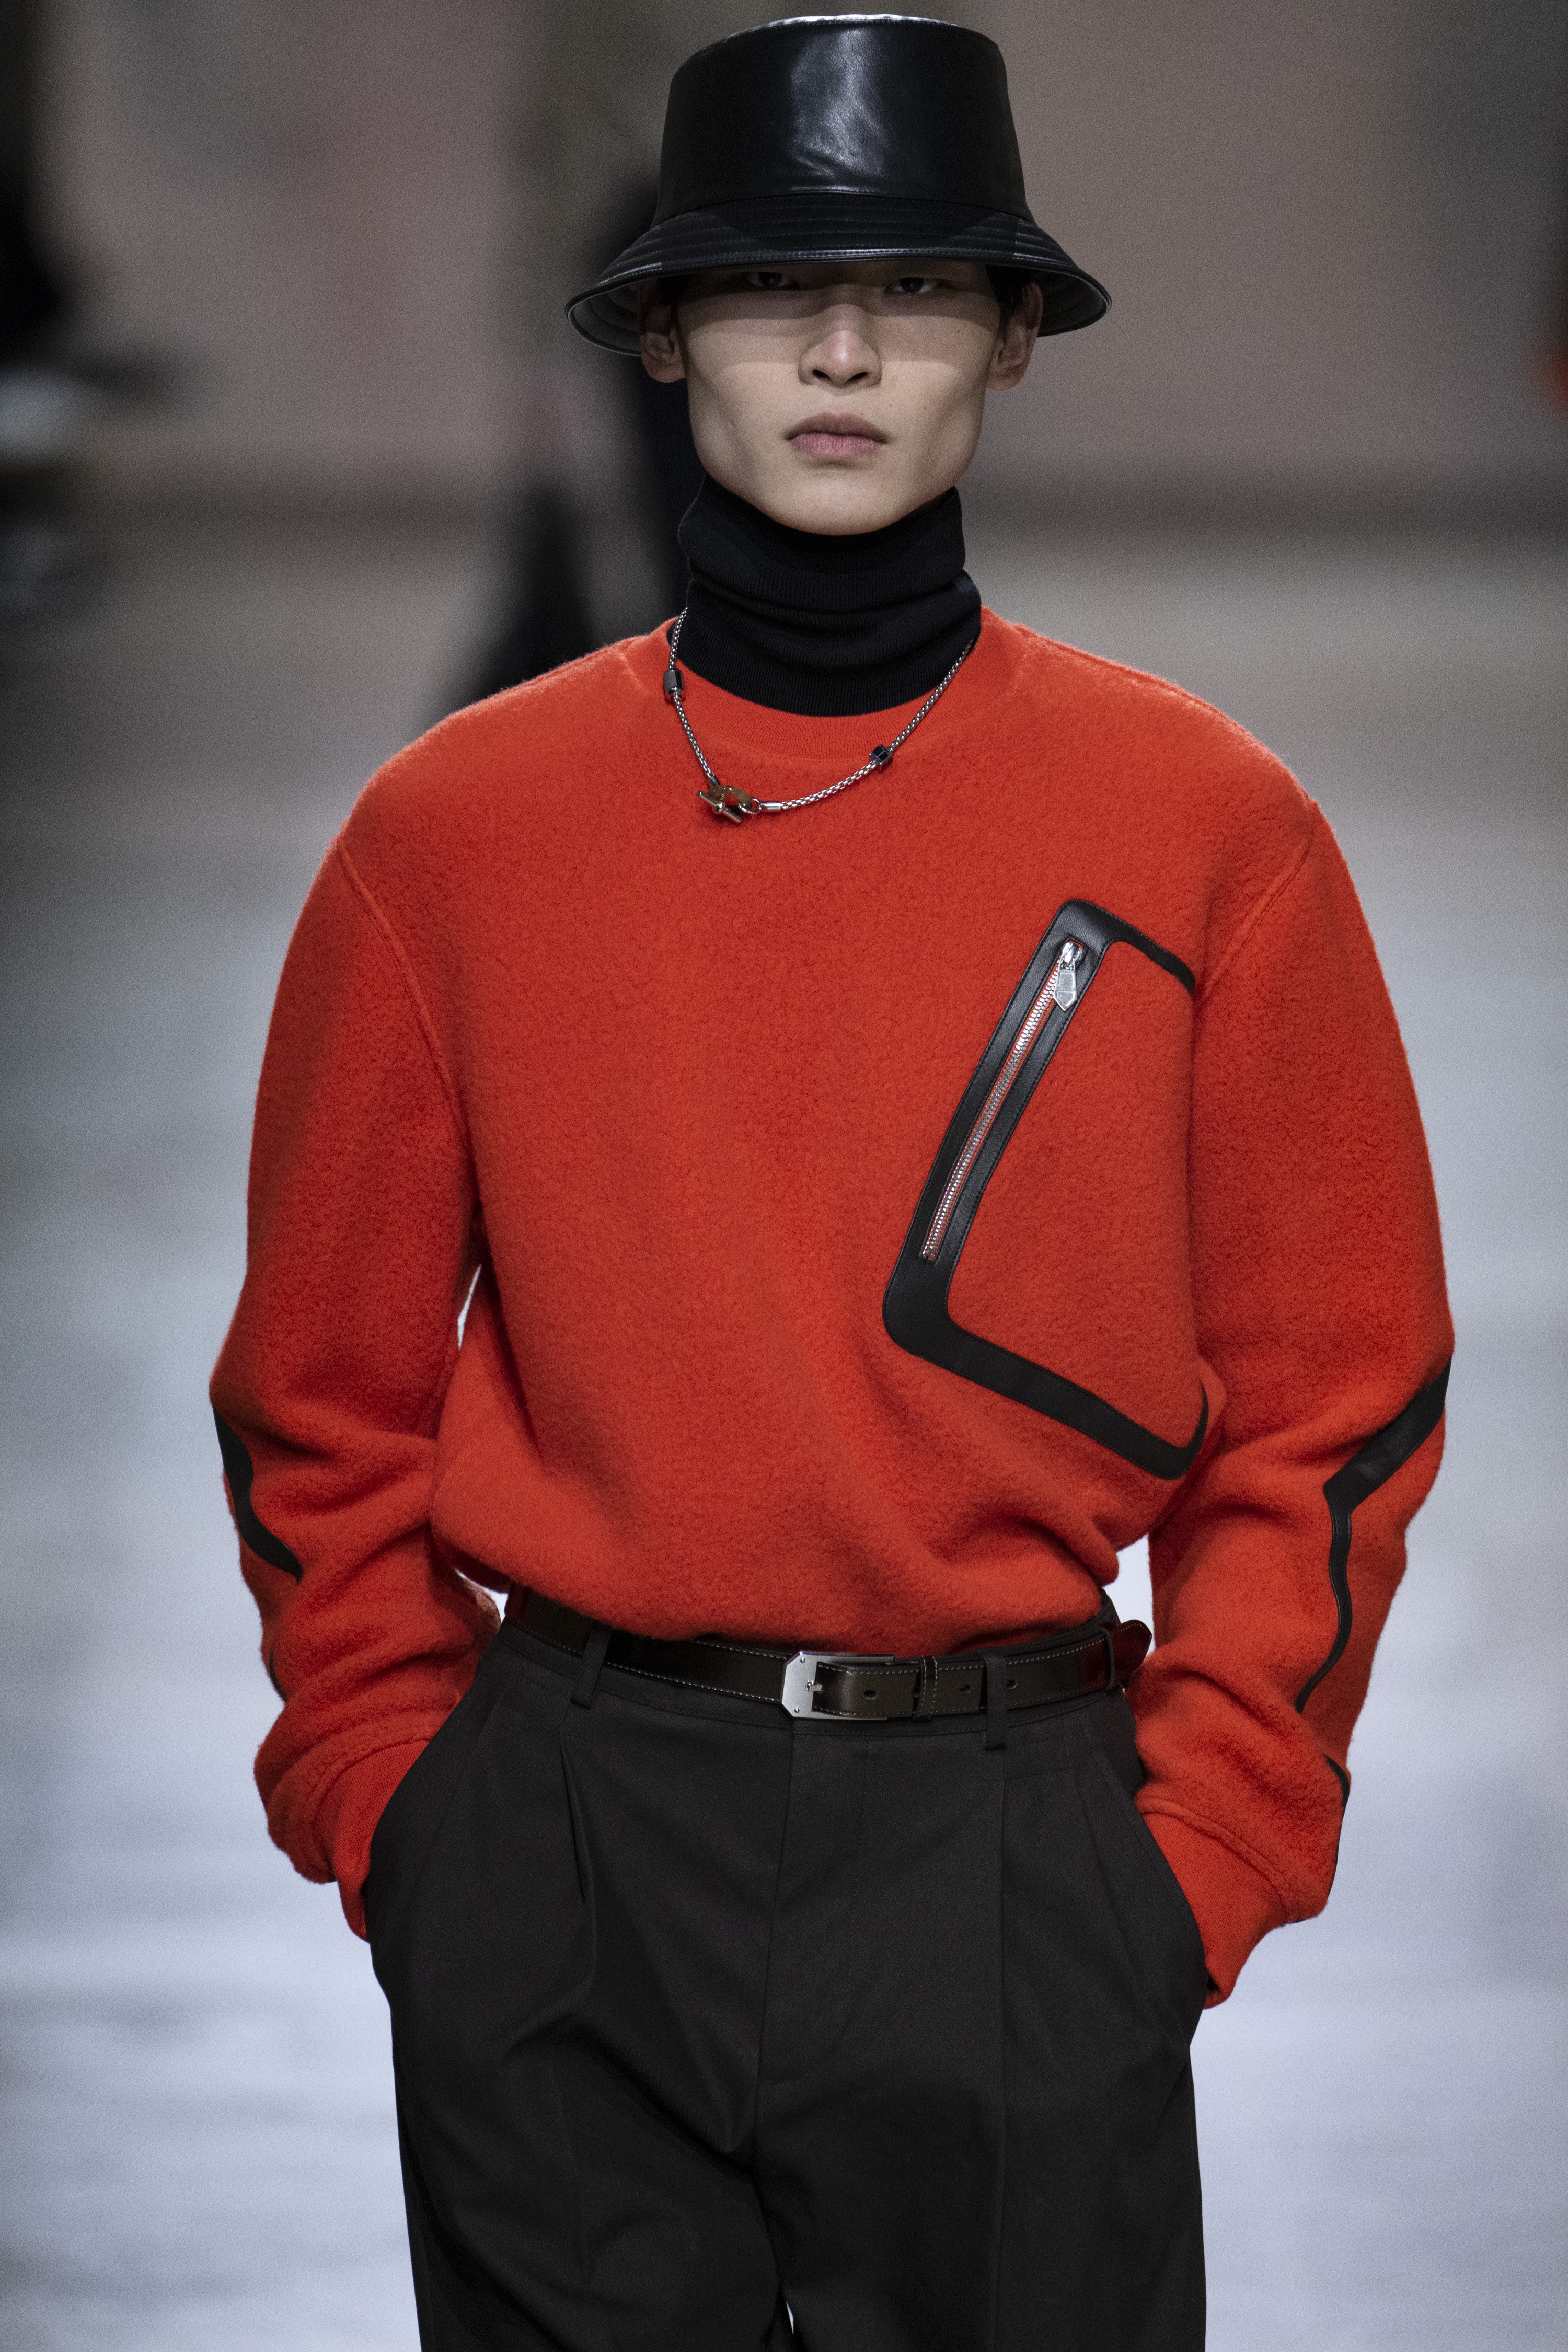 PARIS, FRANCE - JANUARY 22: A model walks the runway during the Hermes Ready to Wear Fall/Winter 2022-2023 fashion show as part of the Paris Men Fashion Week on January 22, 2022 in Paris, France. (Photo by Victor VIRGILE/Gamma-Rapho via Getty Images) (Foto: Gamma-Rapho via Getty Images)